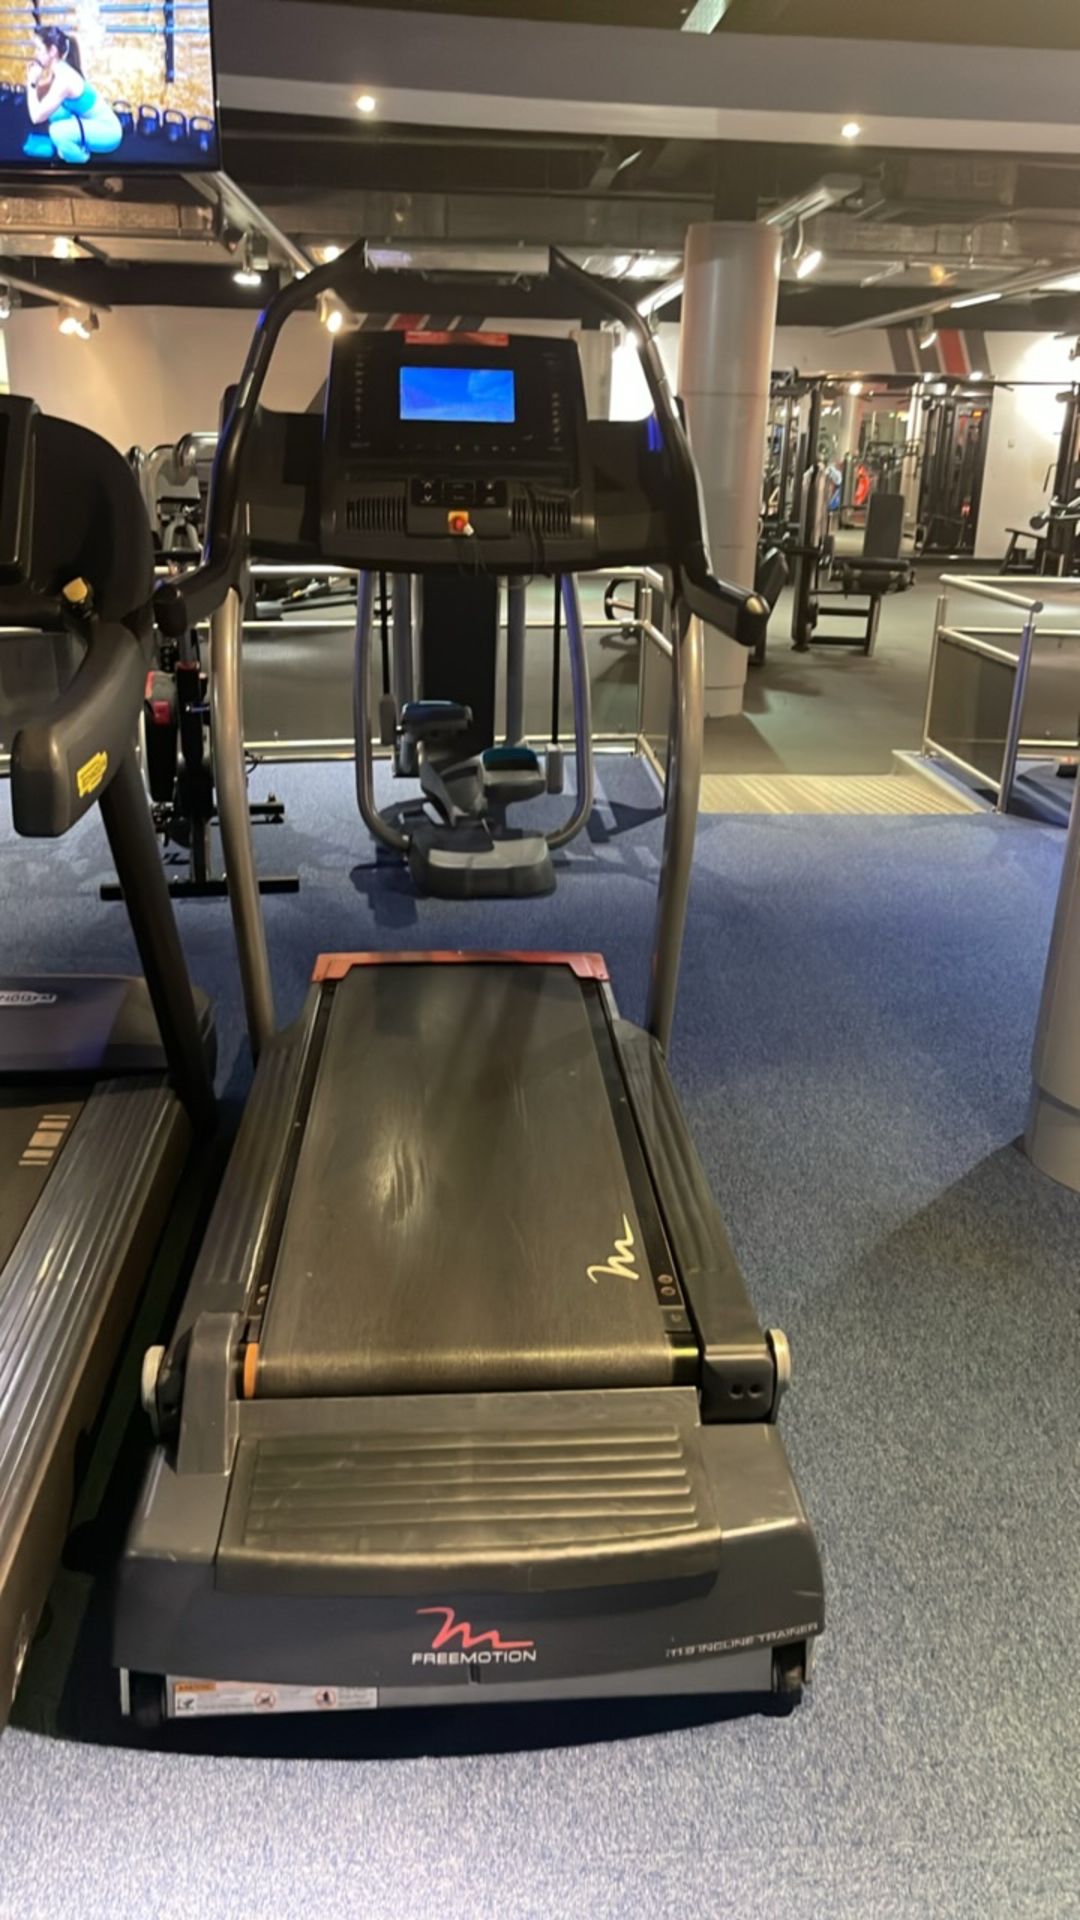 FreeMotion Incline Treadmill - Image 2 of 11